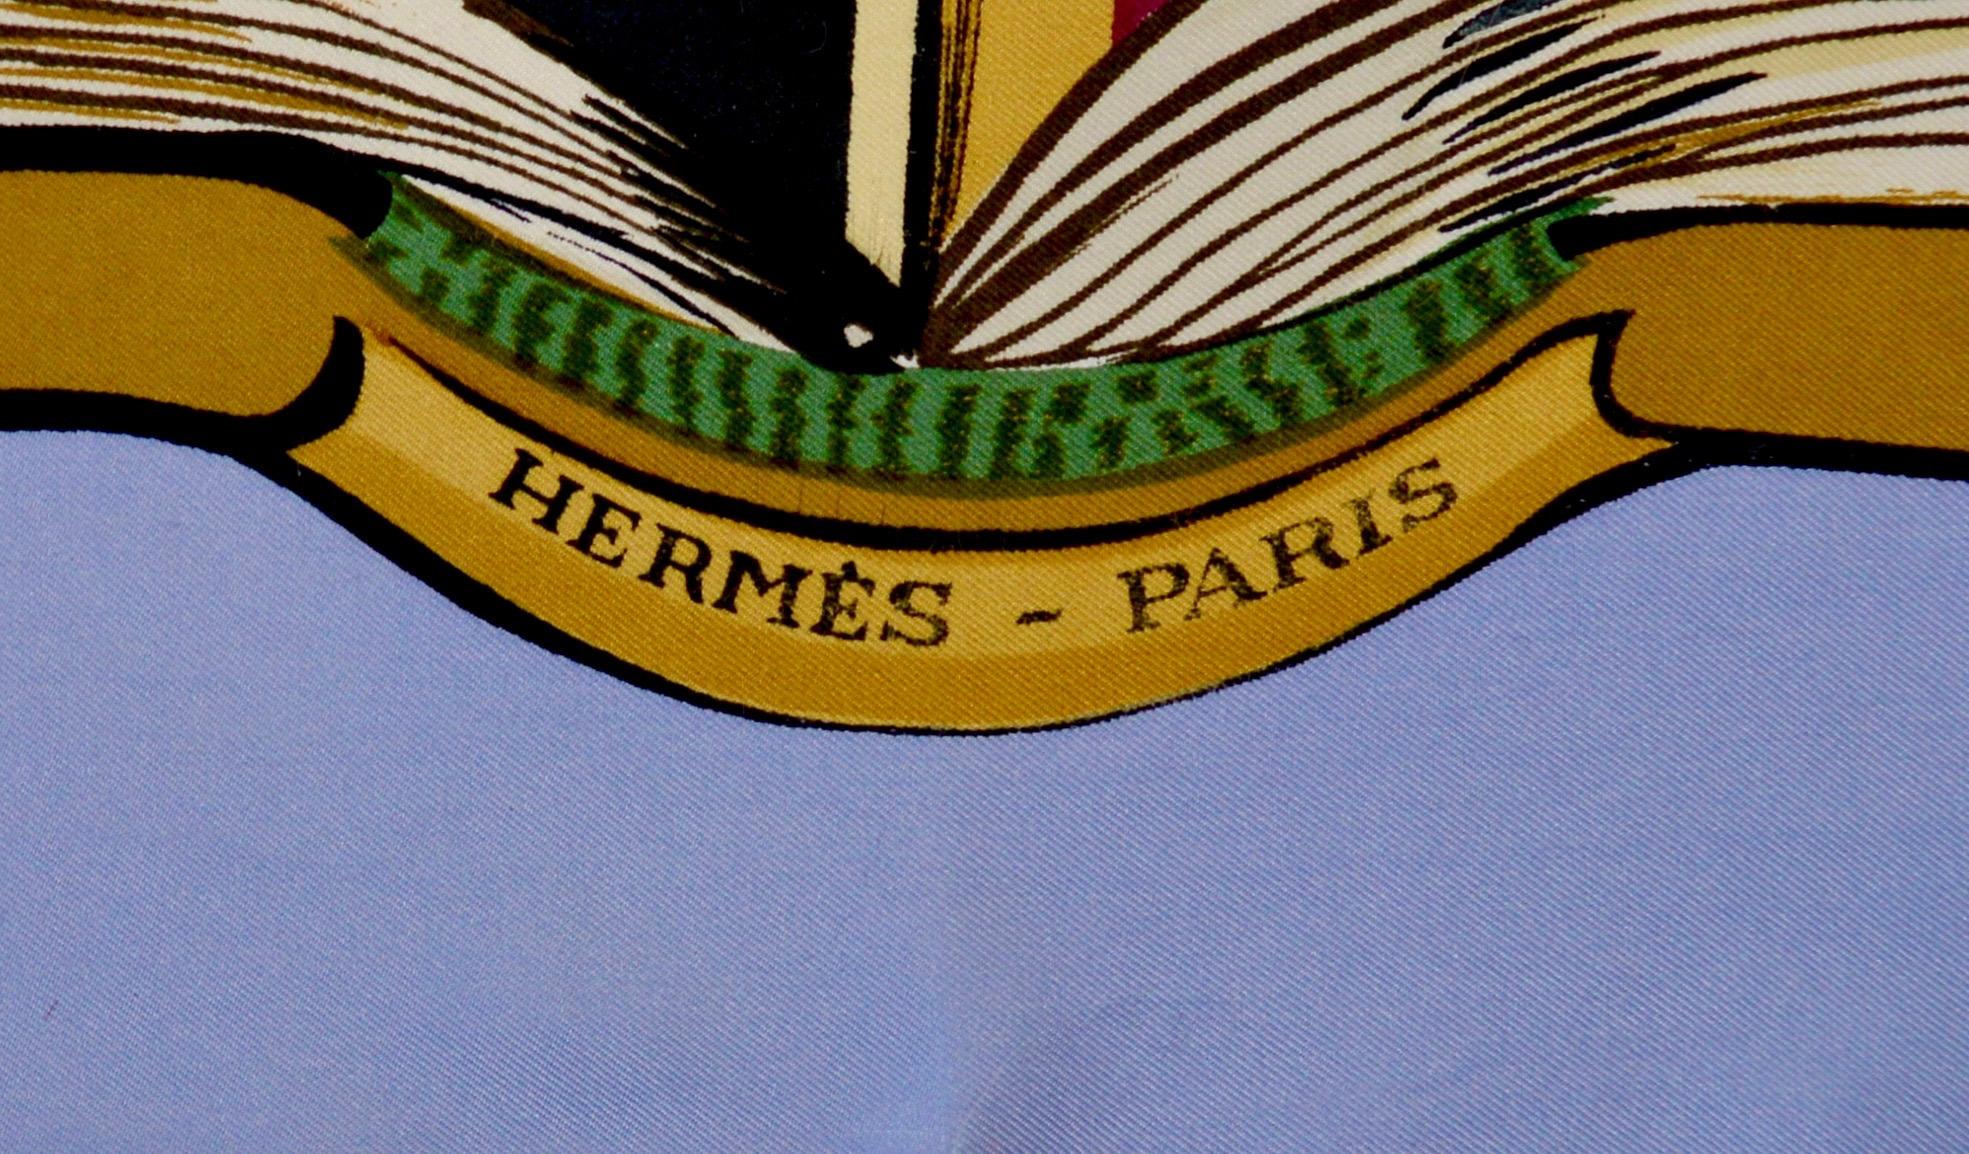 A wonderful Hèrmes silk scarf first designed in 1962 by Lise Coutin. Depicting an image of an open book filled with coats of arms, monograms and heraldic symbols finished in lilac, black, gold, green and madder rose colourway. 
Marked Hermes Paris